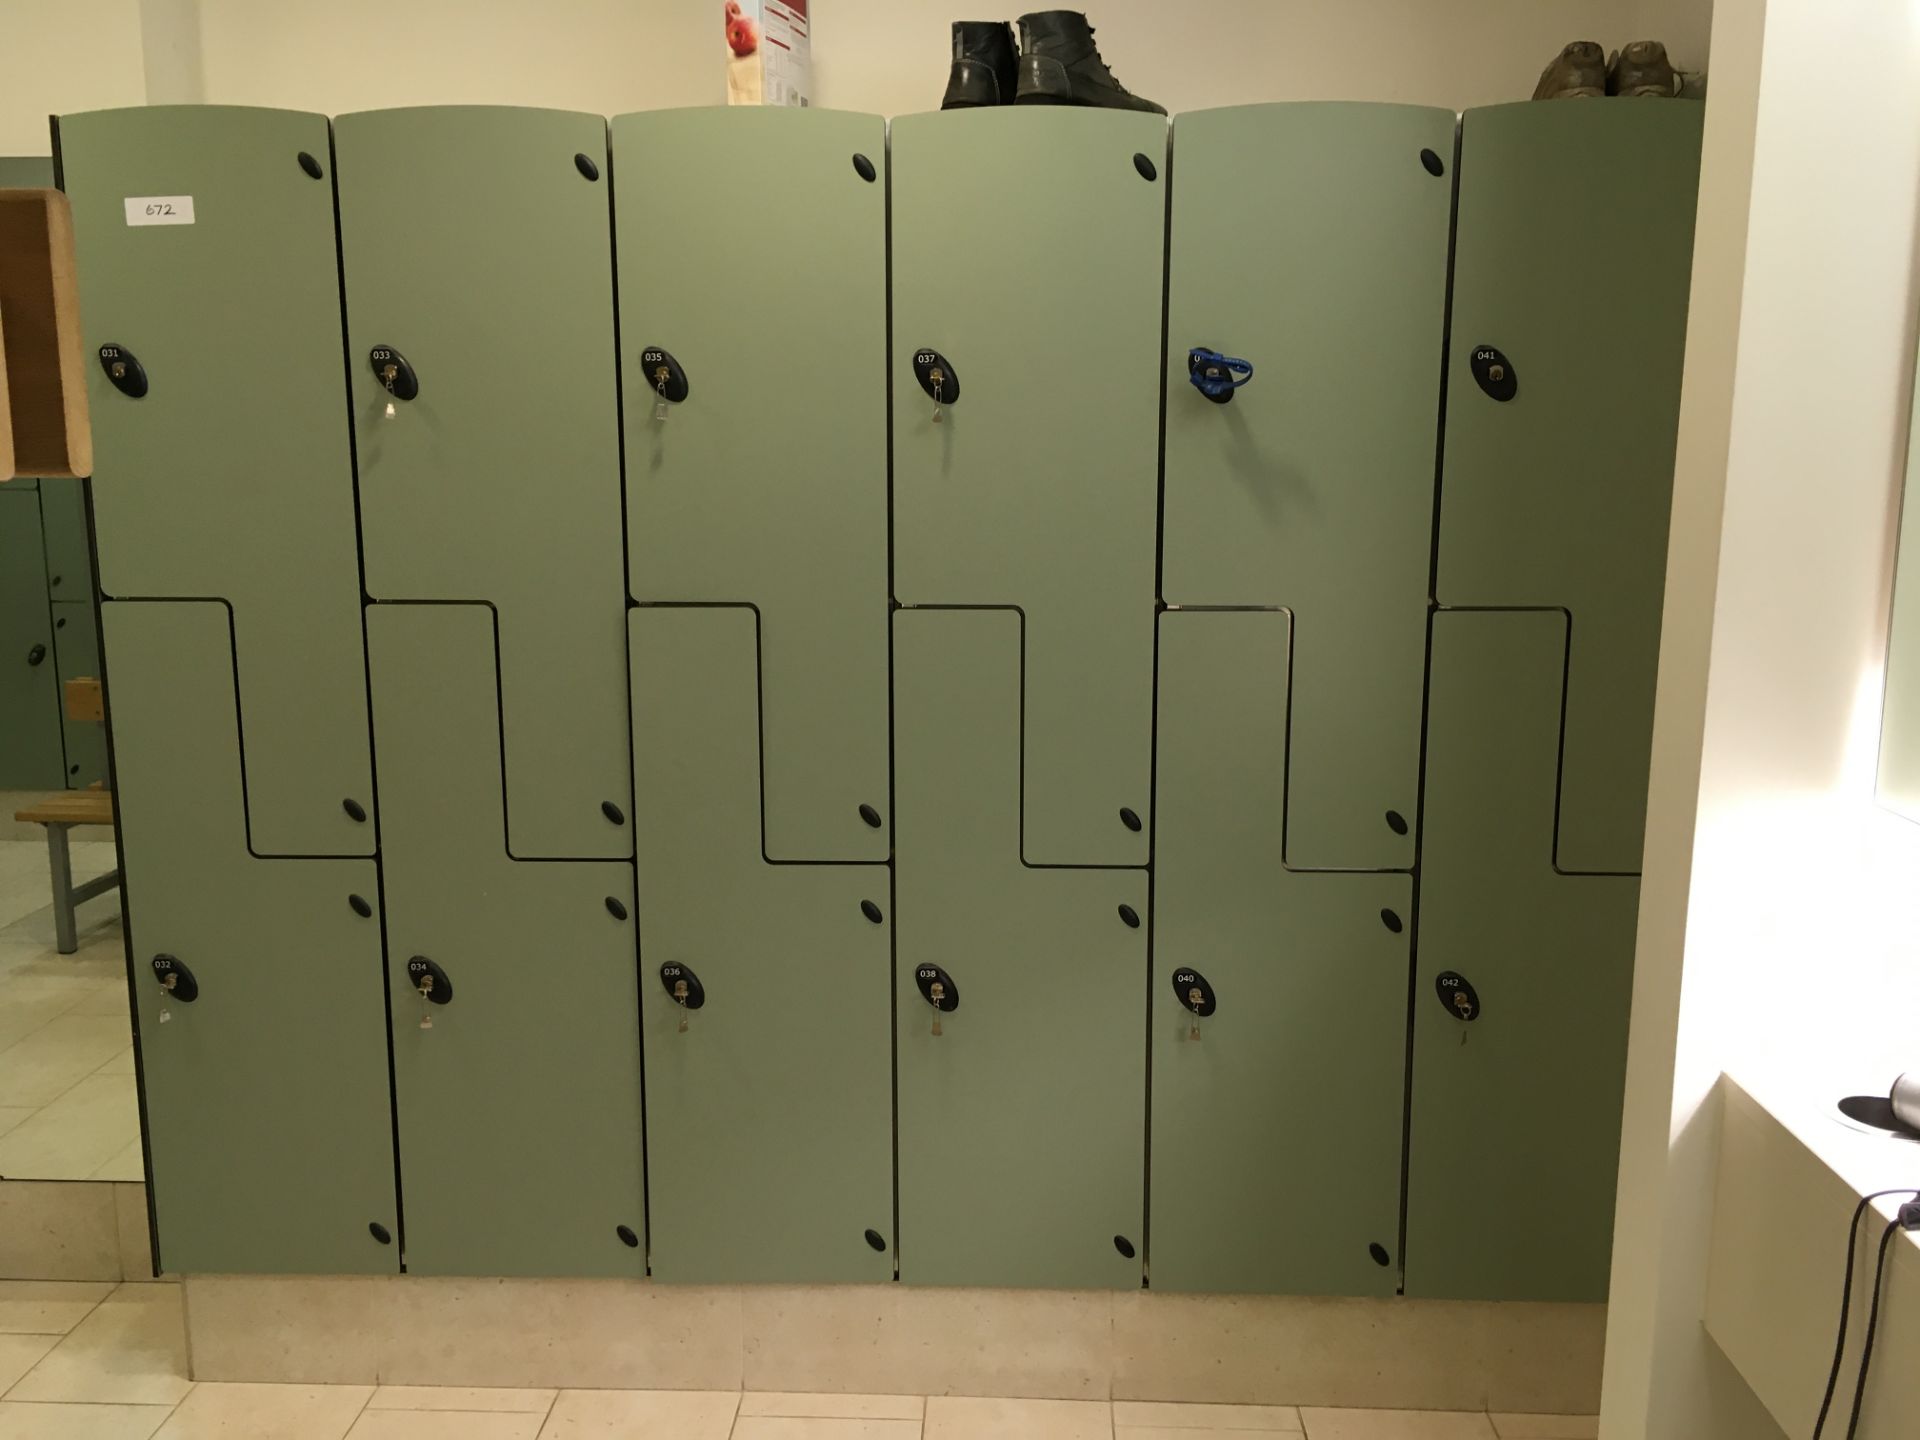 Bank of 12 Changing Room Lockers